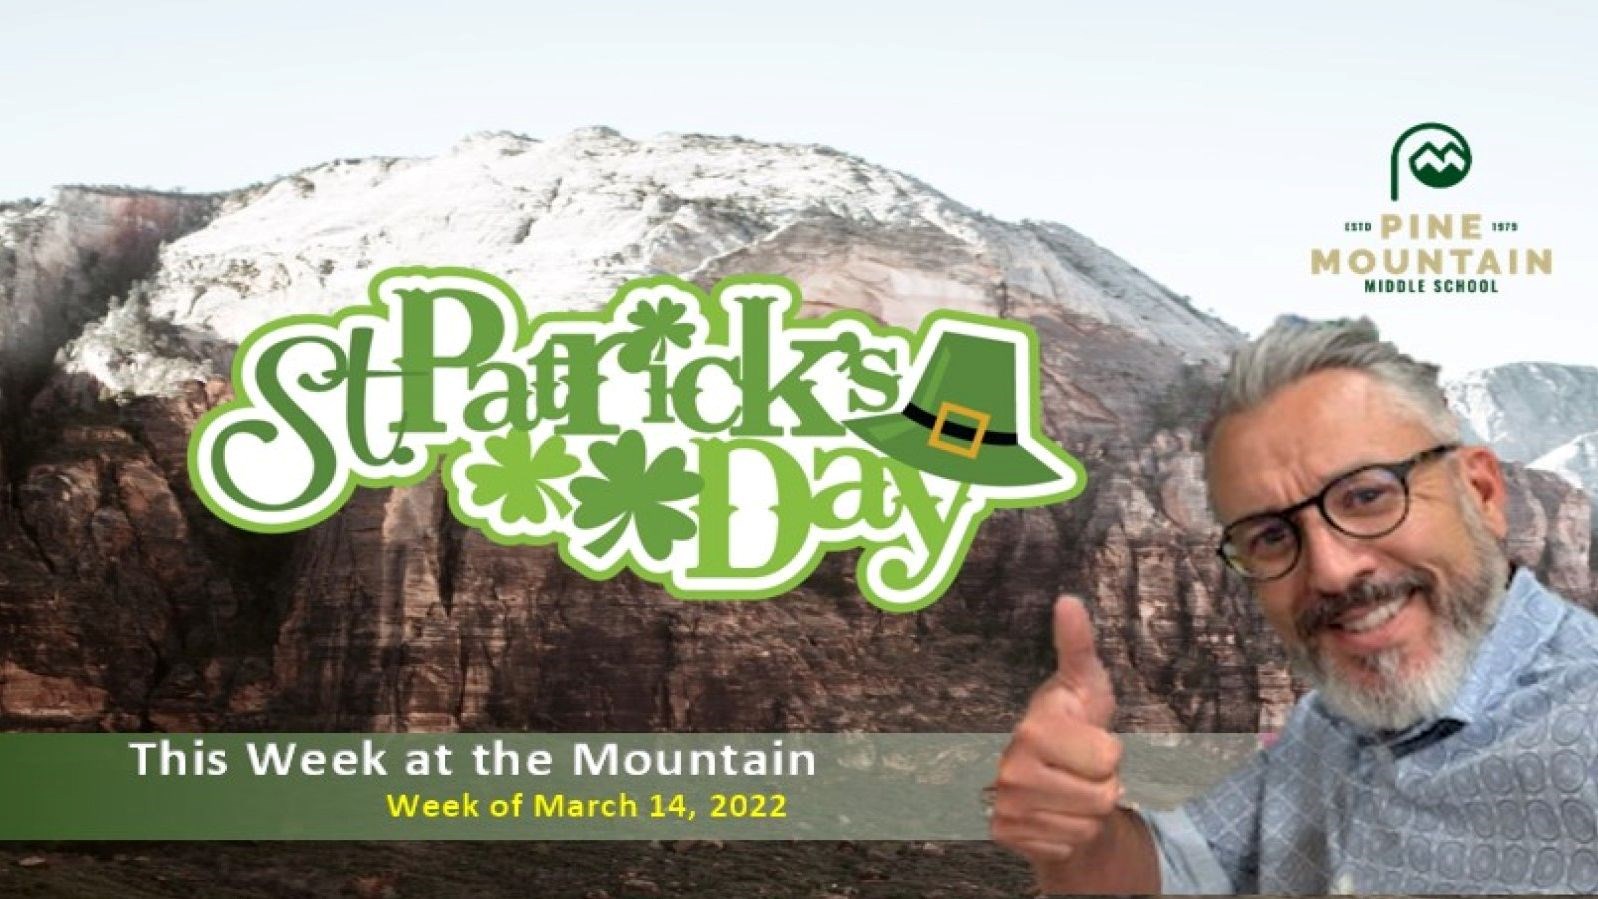 St. Patrick's Day Image with Principal